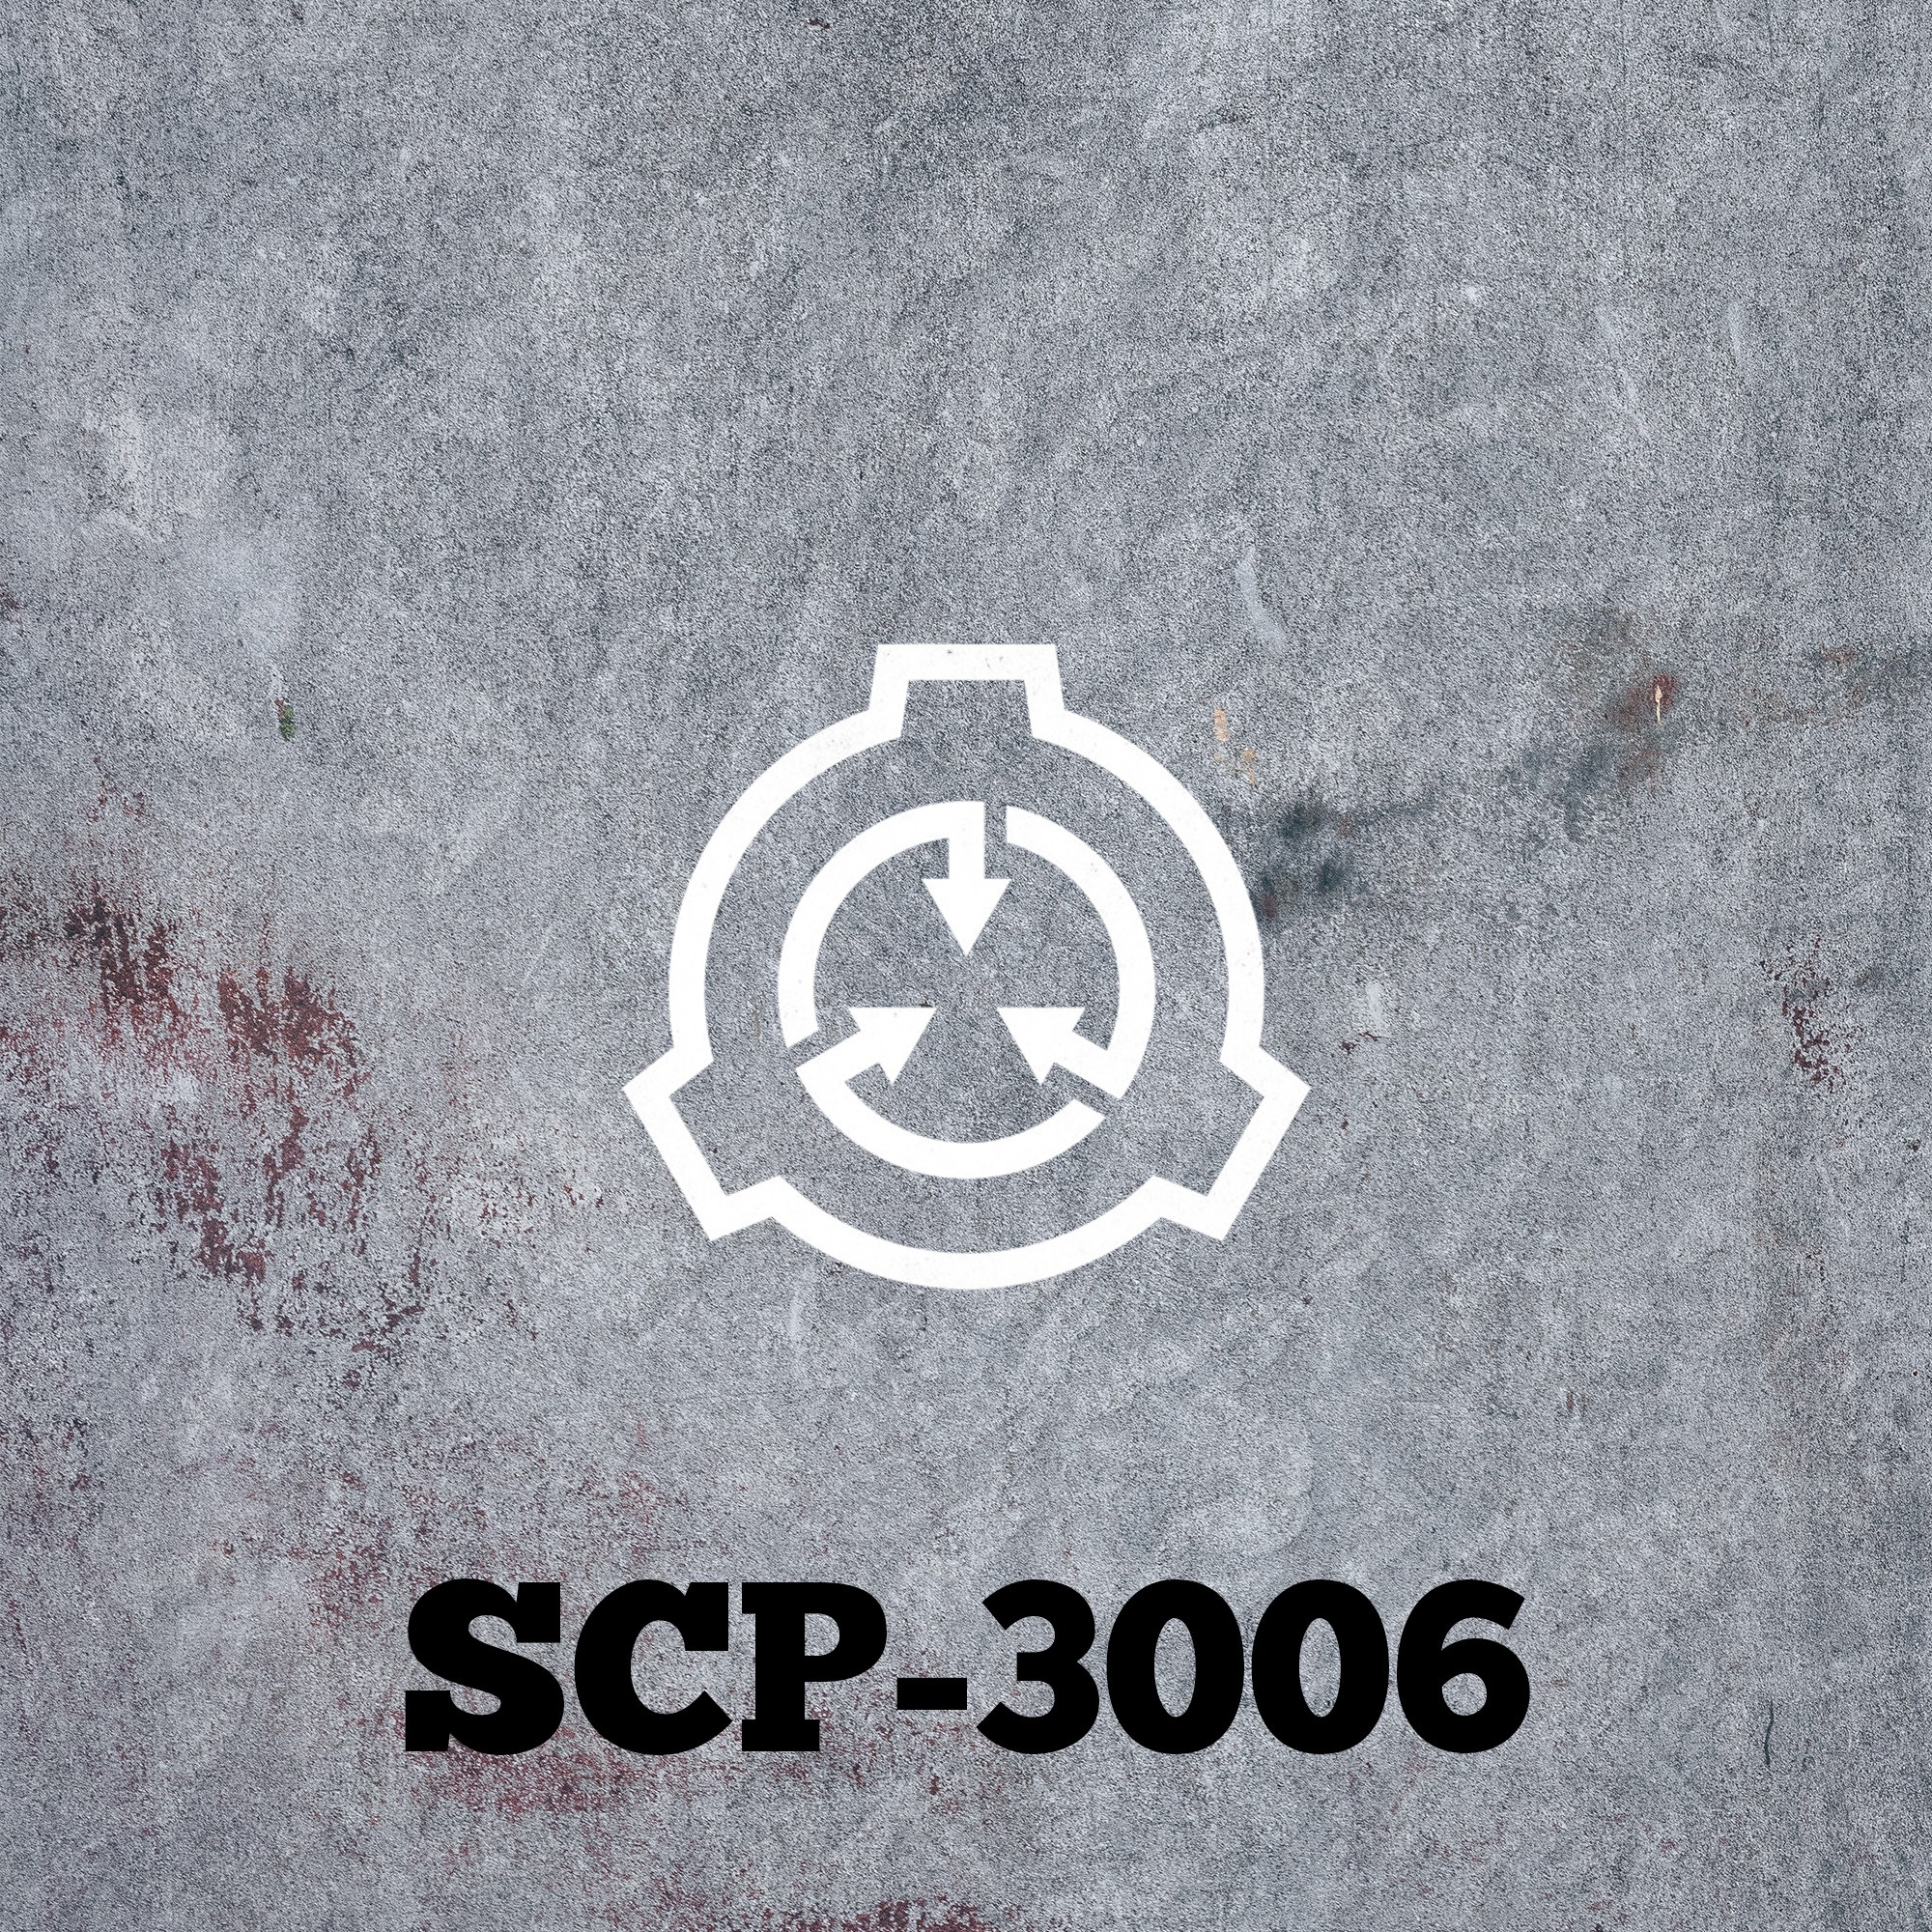 SCP-3006: Twice the Number One